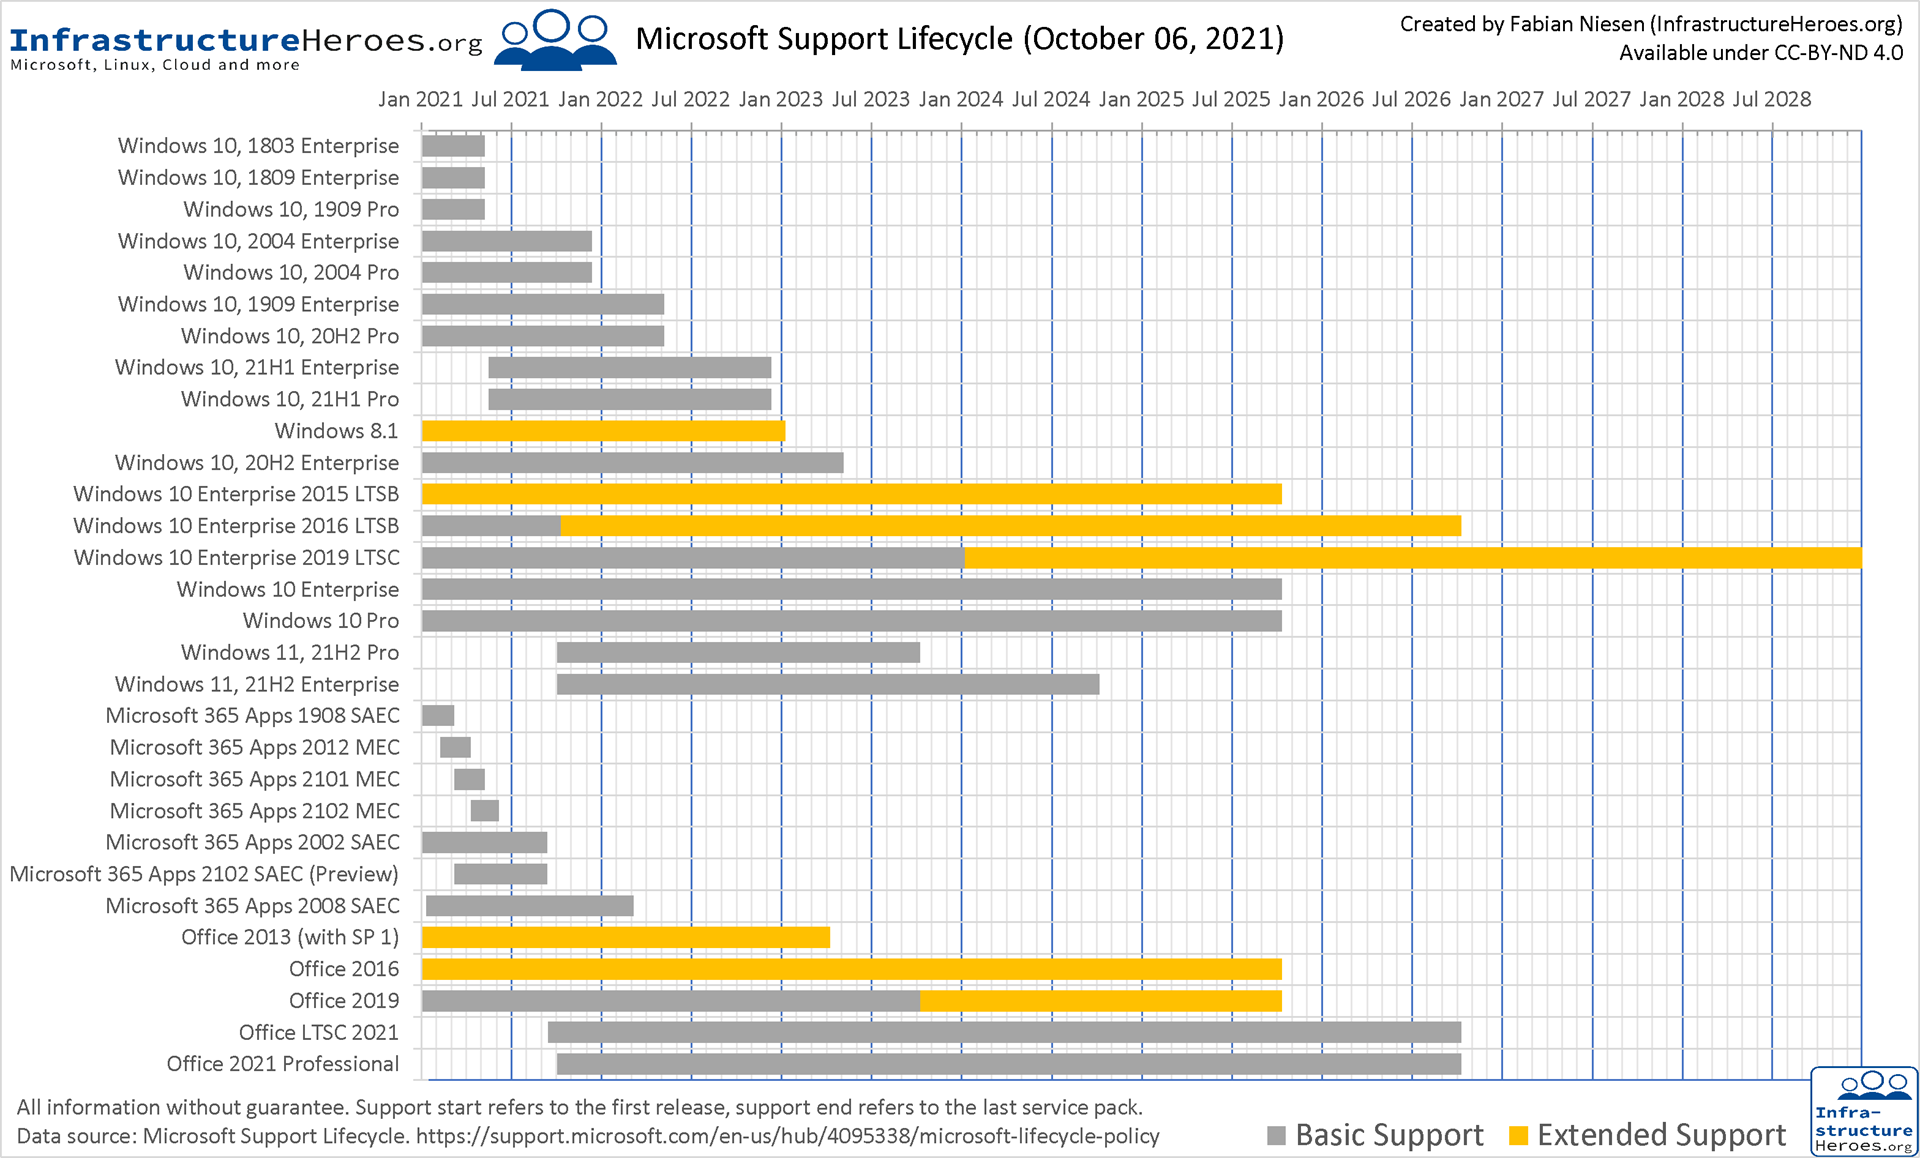 Microsoft-Support_Lifecycle-EN-Client-1920